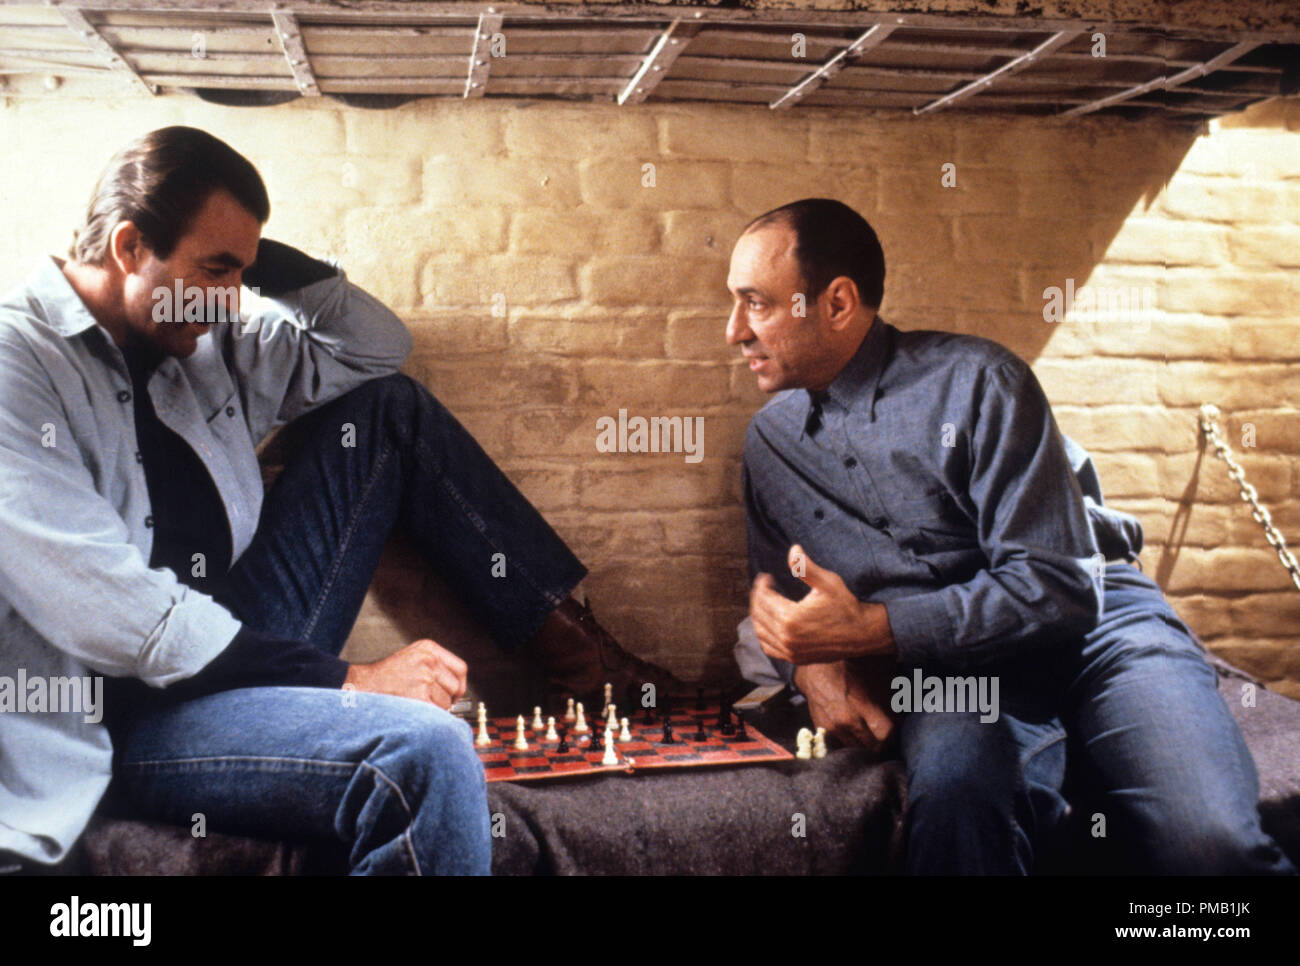 Film still or Publicity still from 'An Innocent Man'  Tom Selleck, F. Murray Abraham  © 1989 Touchstone Pictures  All Rights Reserved   File Reference # 33025 016THA  For Editorial Use Only Stock Photo